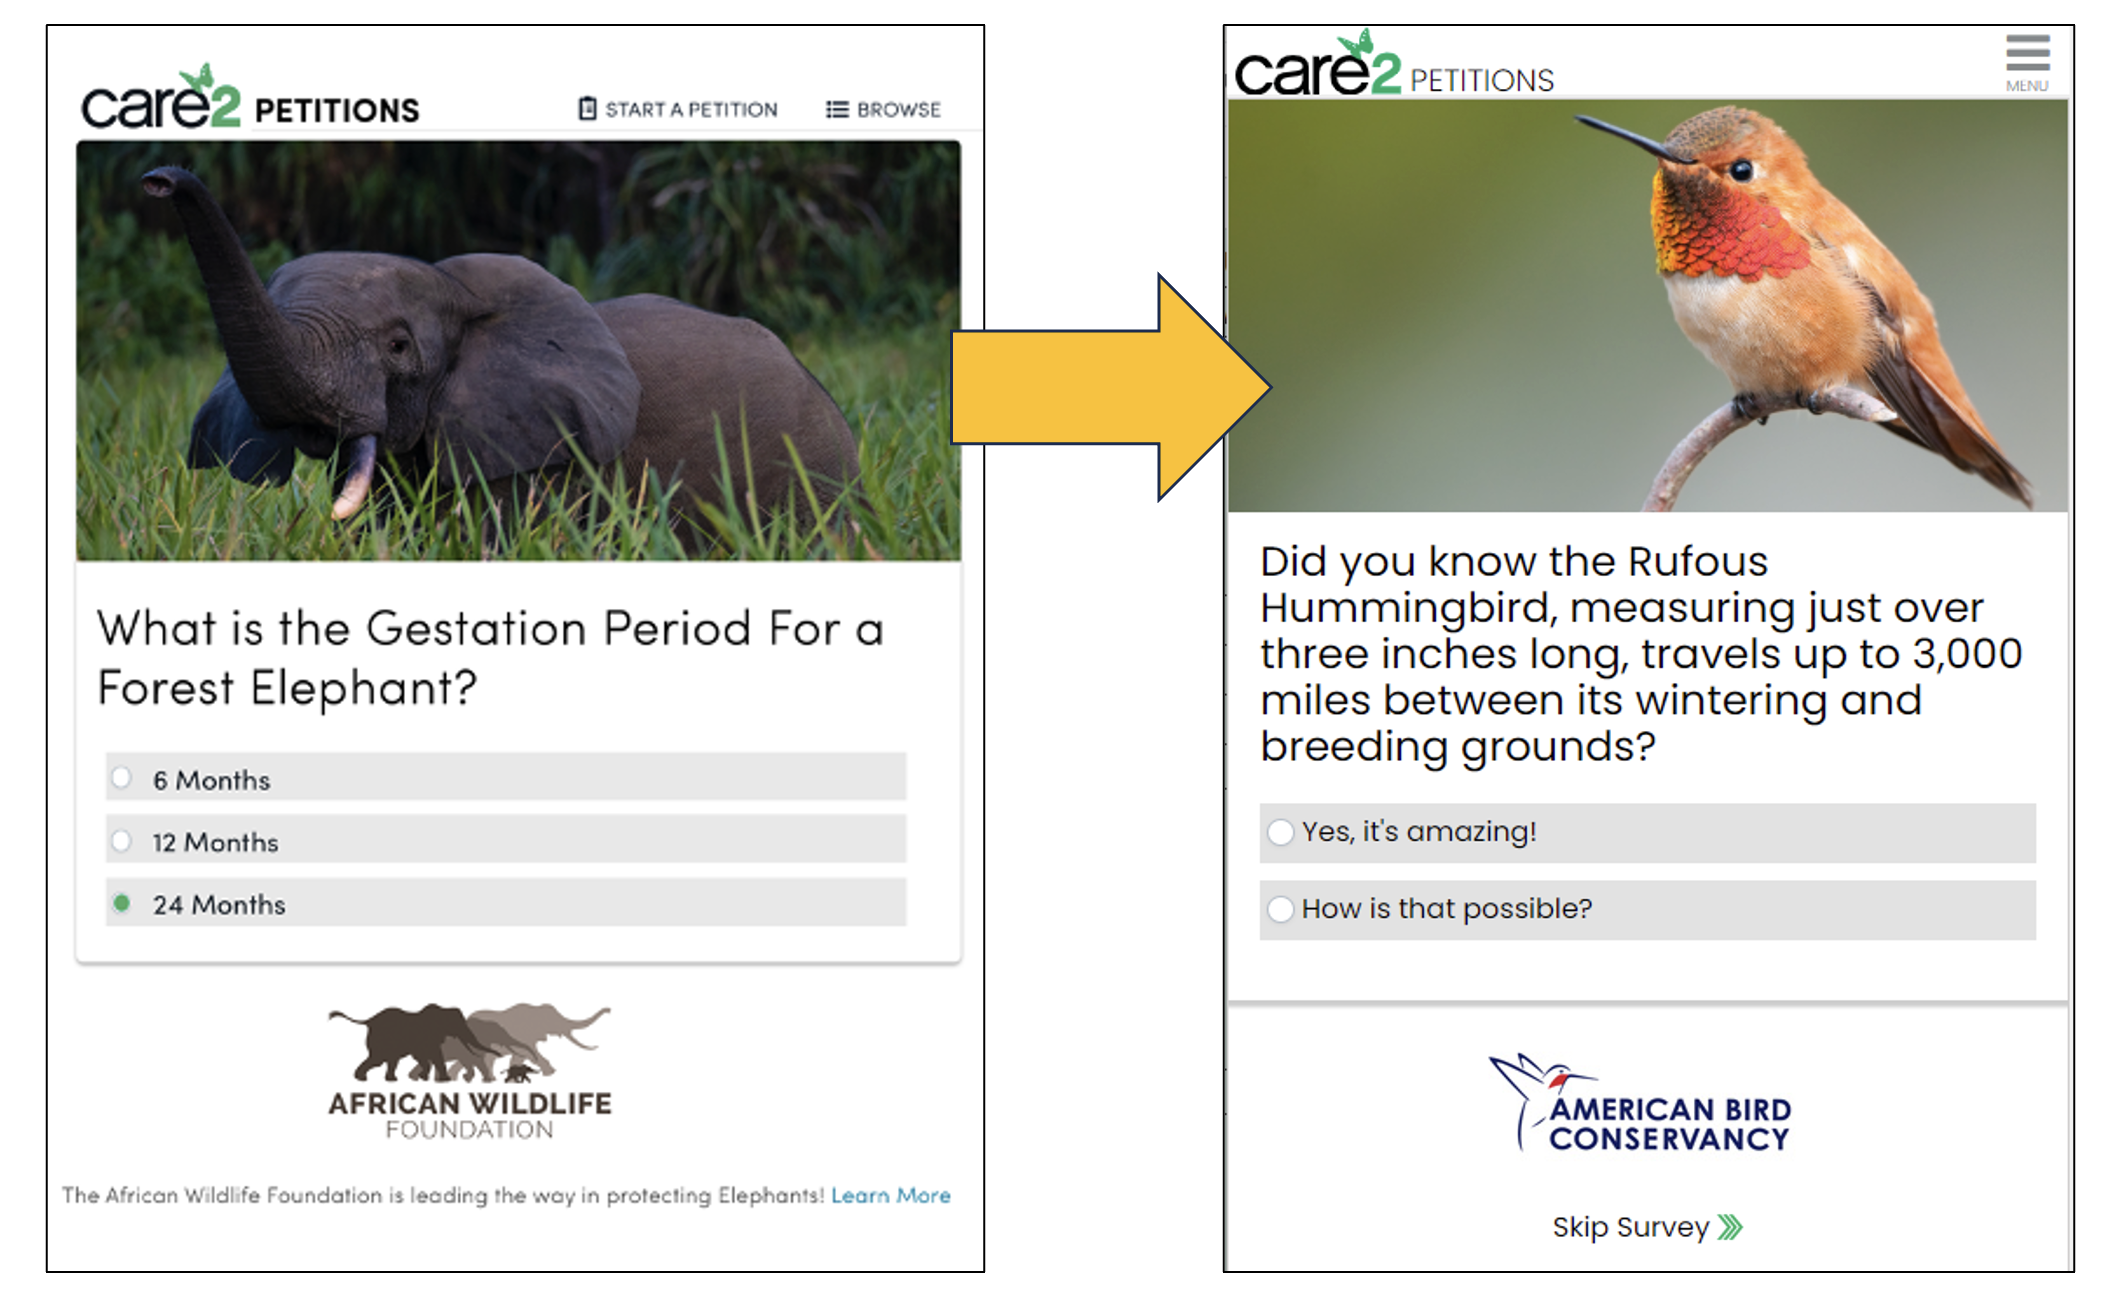 First image: A poll asking what the gestation period for an elephant is, with numeric choices. Second image: The fact that hummingbirds travel 3000 miles between breeding grounds with a poll asking people to select how that fact makes them feel.